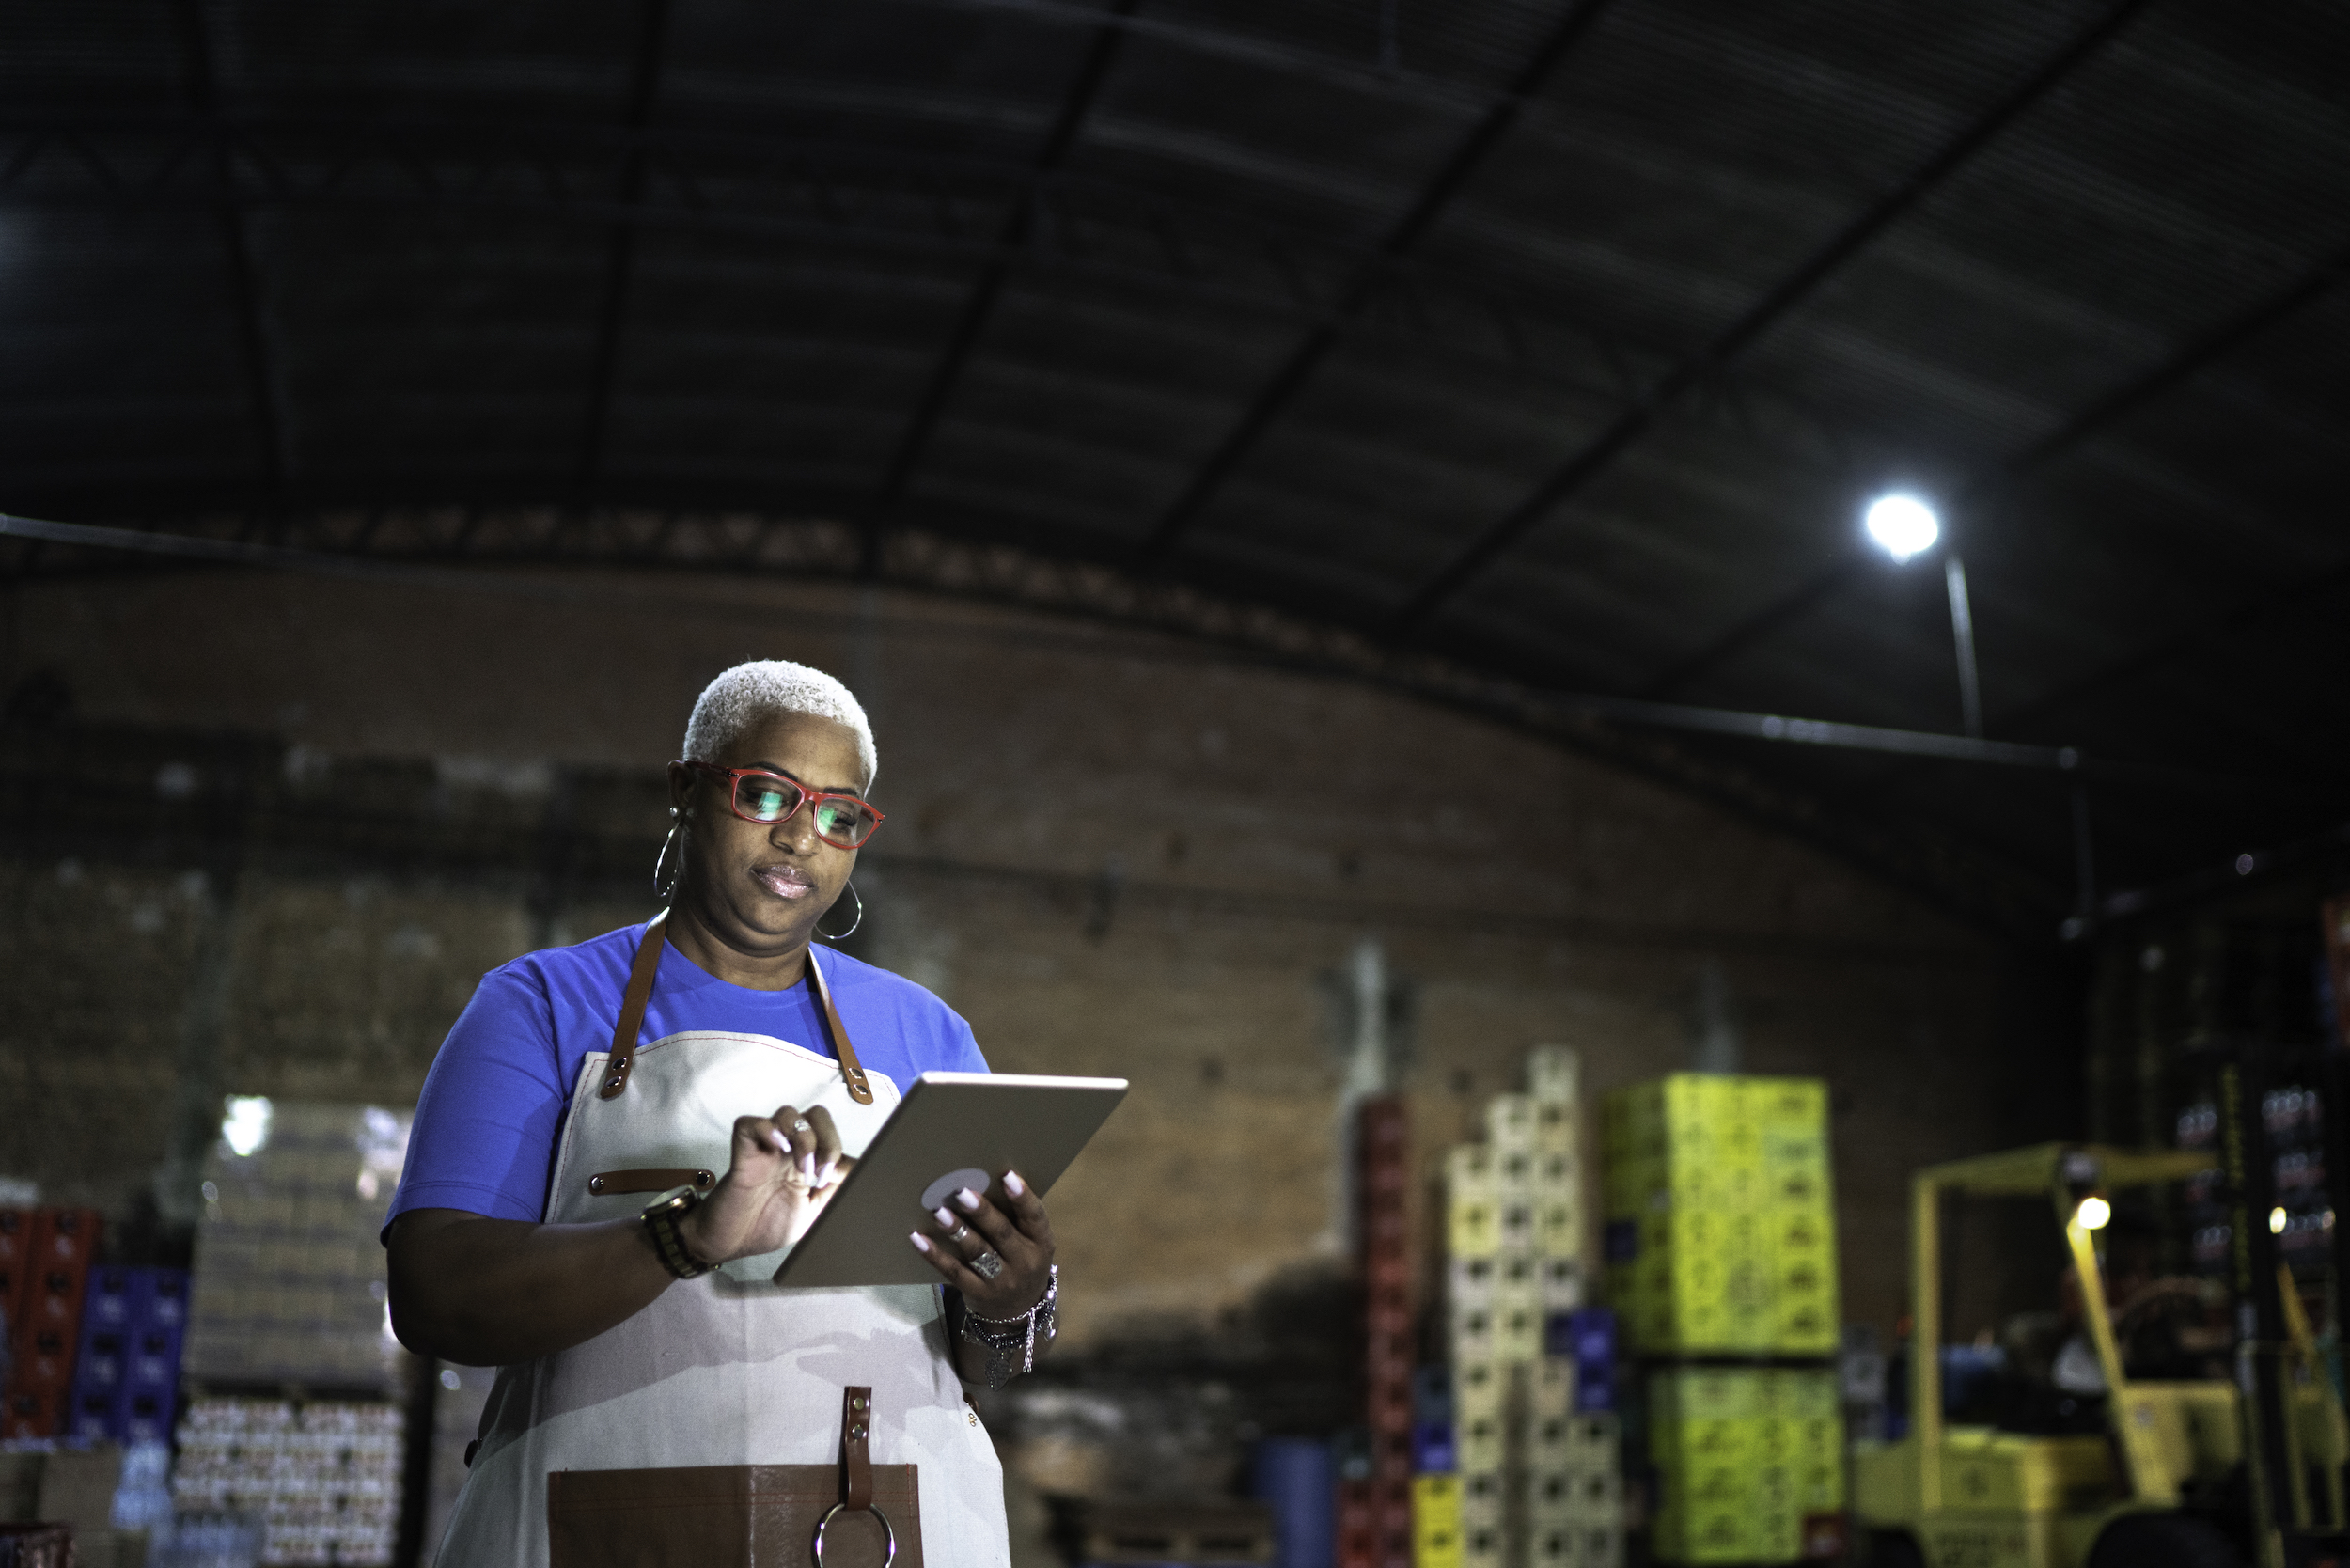 Female worker in warehouse reviewing iPad